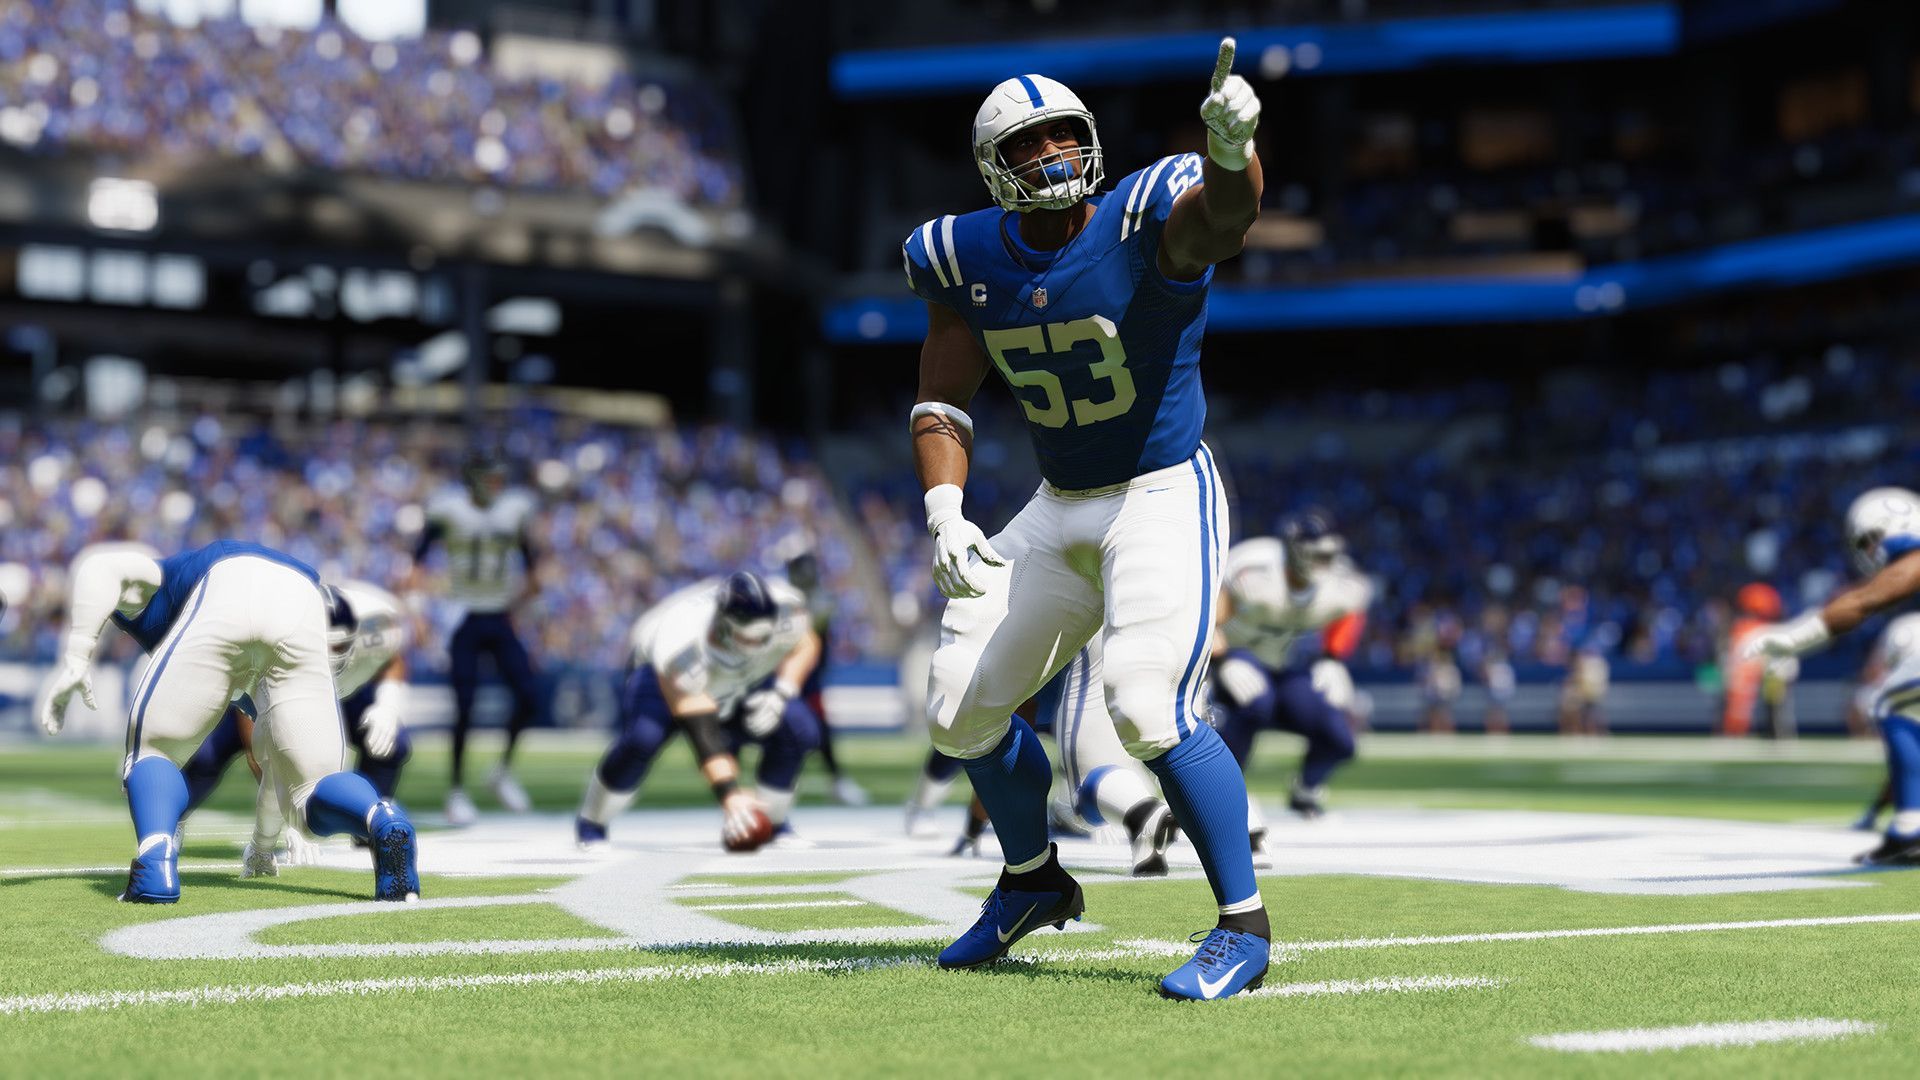 In this article, we are going to be going over our Madden 23 Early Access MUT challenges guide, so you can complete each one and earn the rewards.